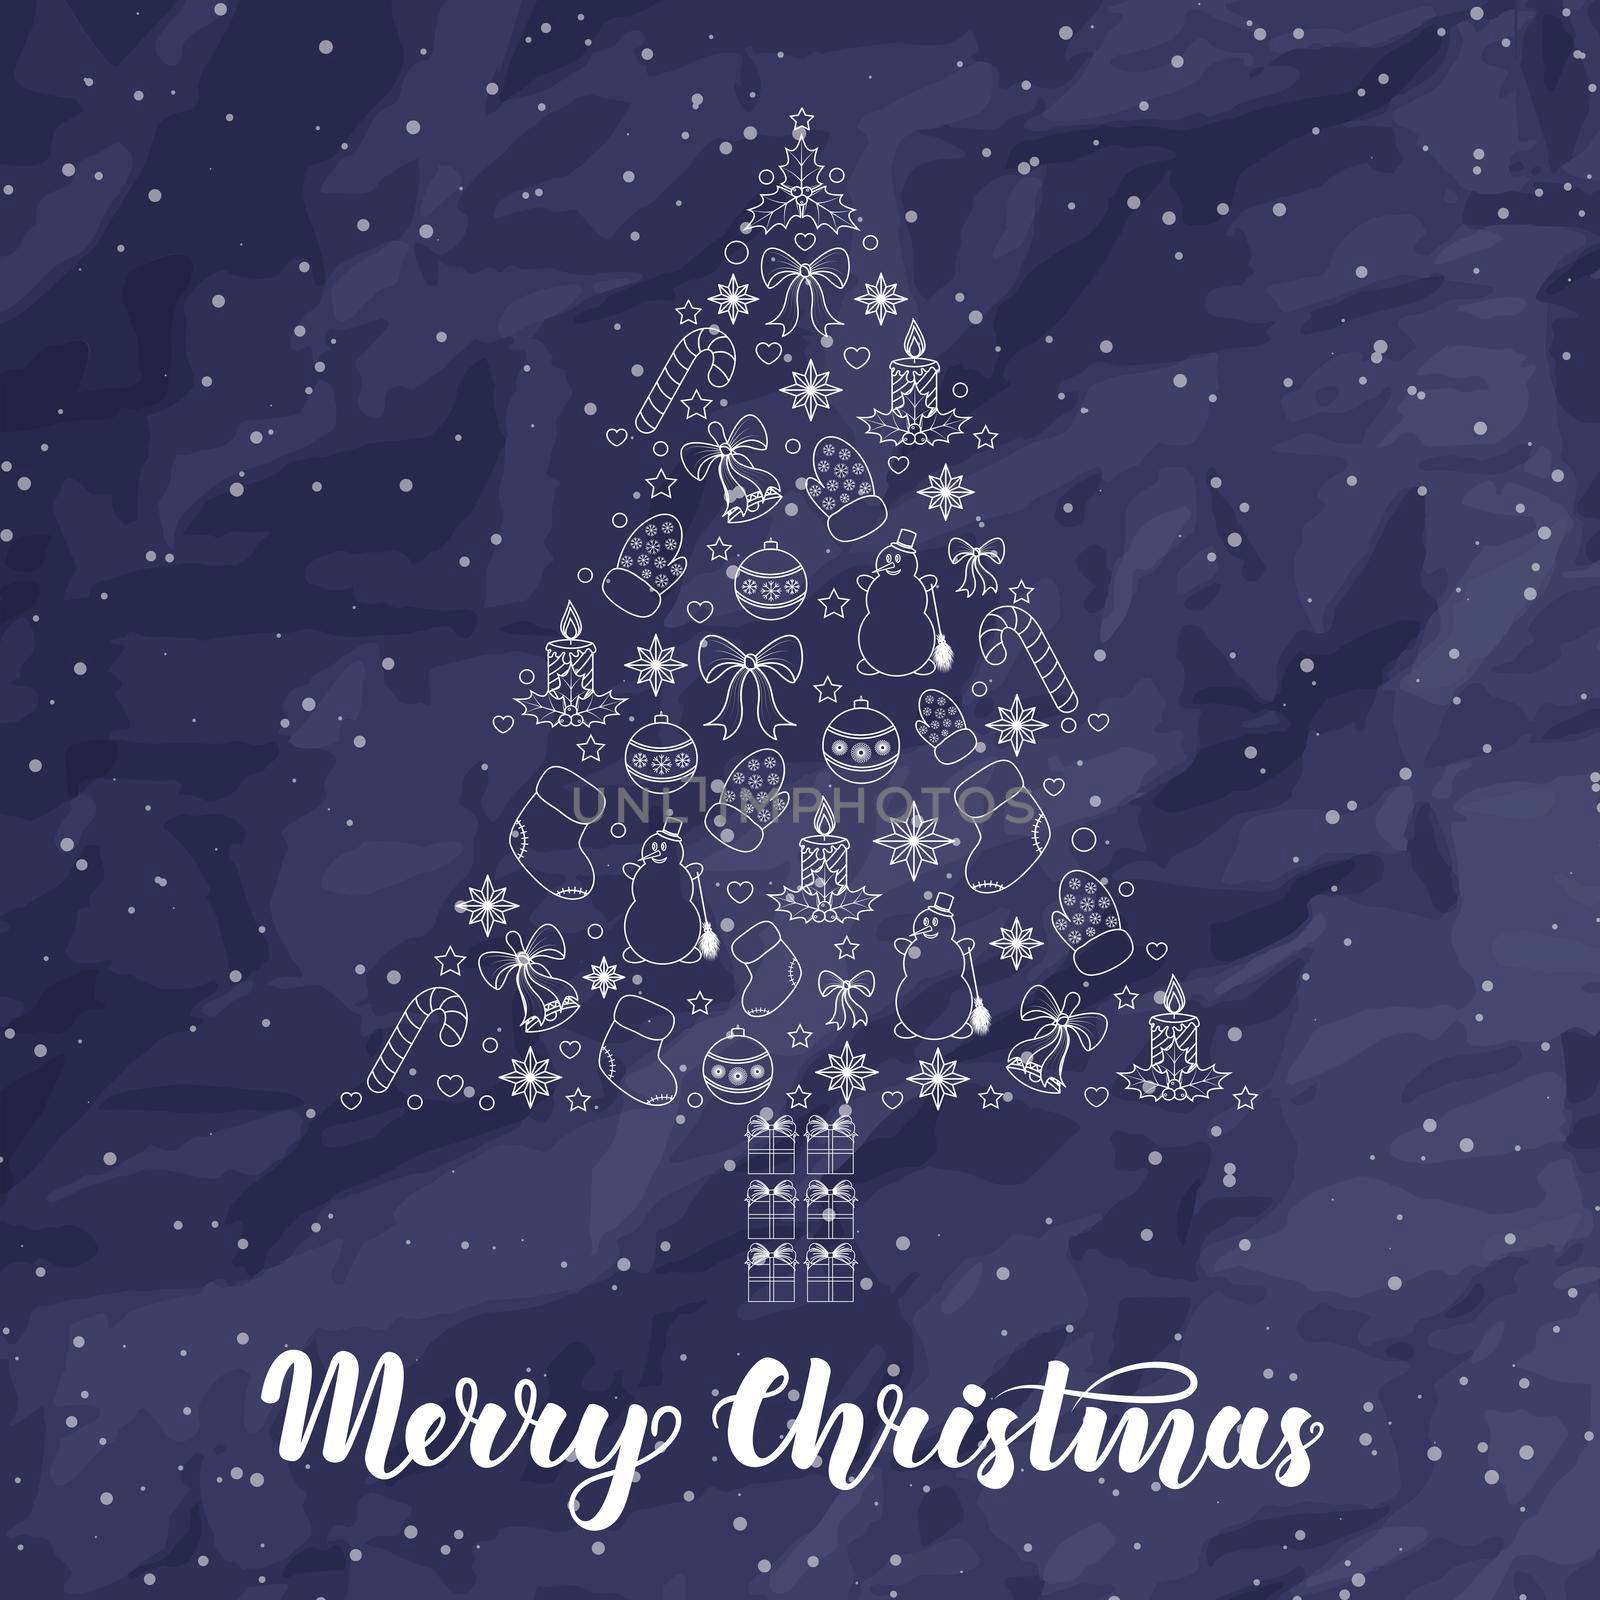 Abstract stylized christmas tree with white contour on dark blue background. illustration for greeting cards, invitations, gift wrapping and other thematic products.